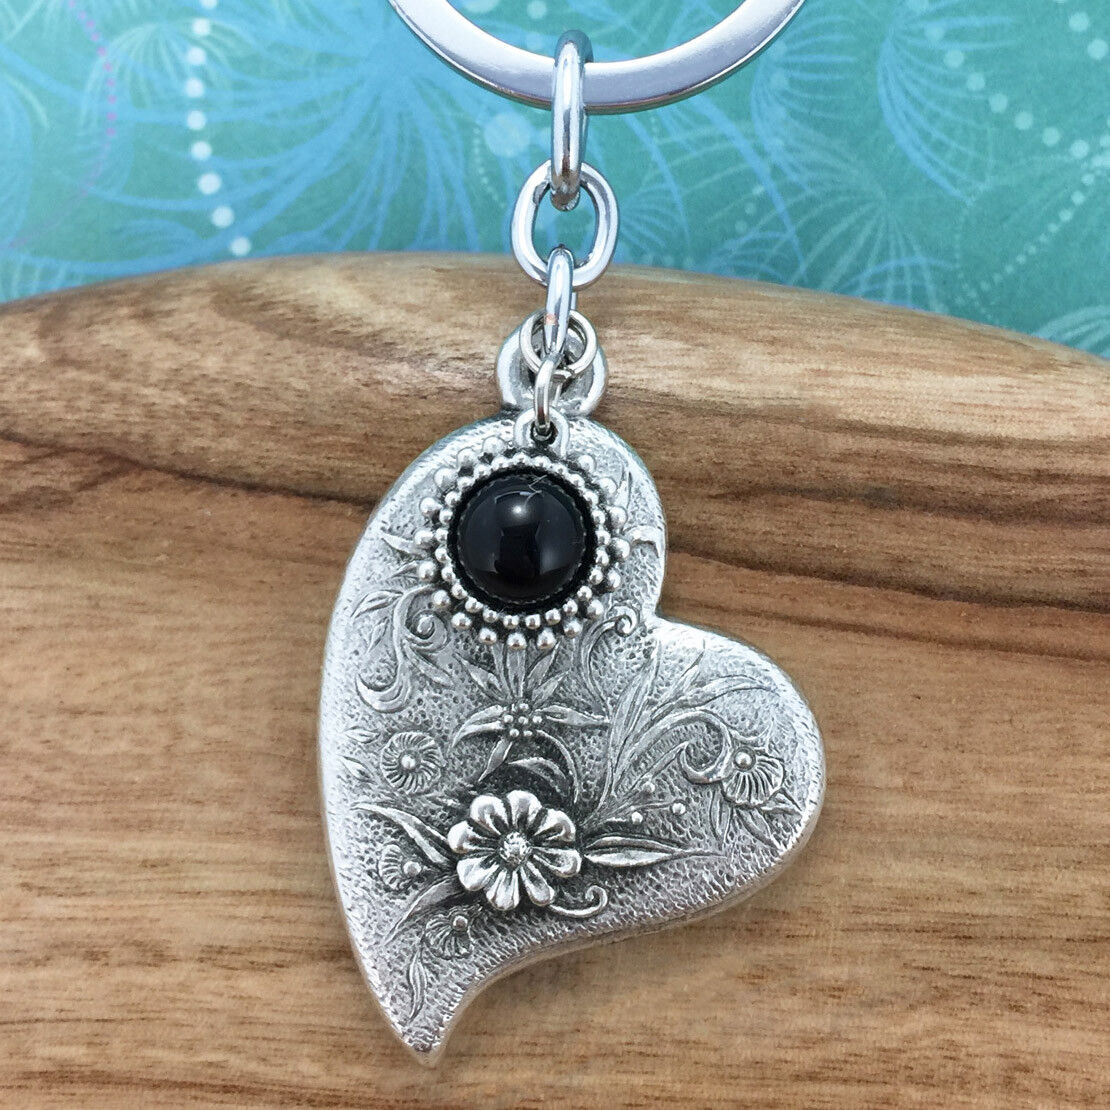 Heart and Flowers Keyring Keychain with Black Onyx Charm